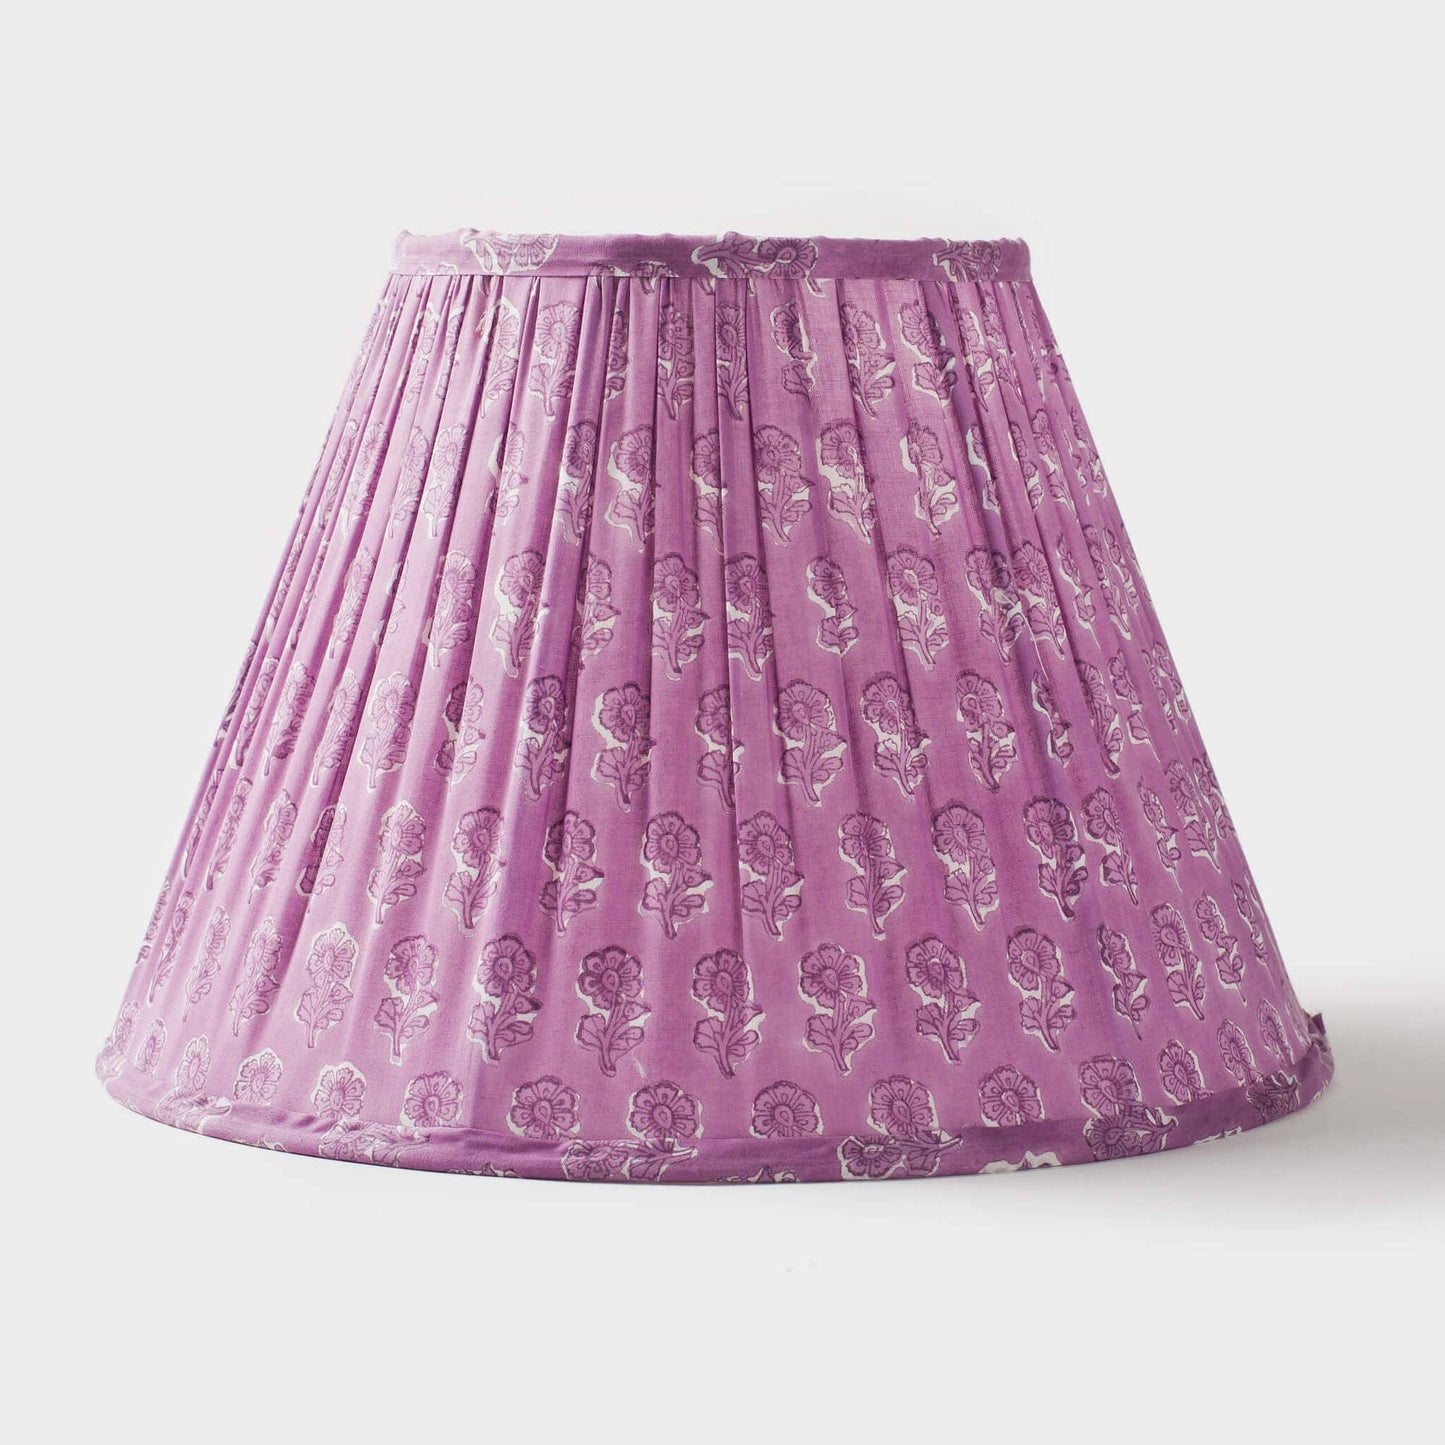 Daisy Gathered Floral Lampshade - Crystal Conner Design